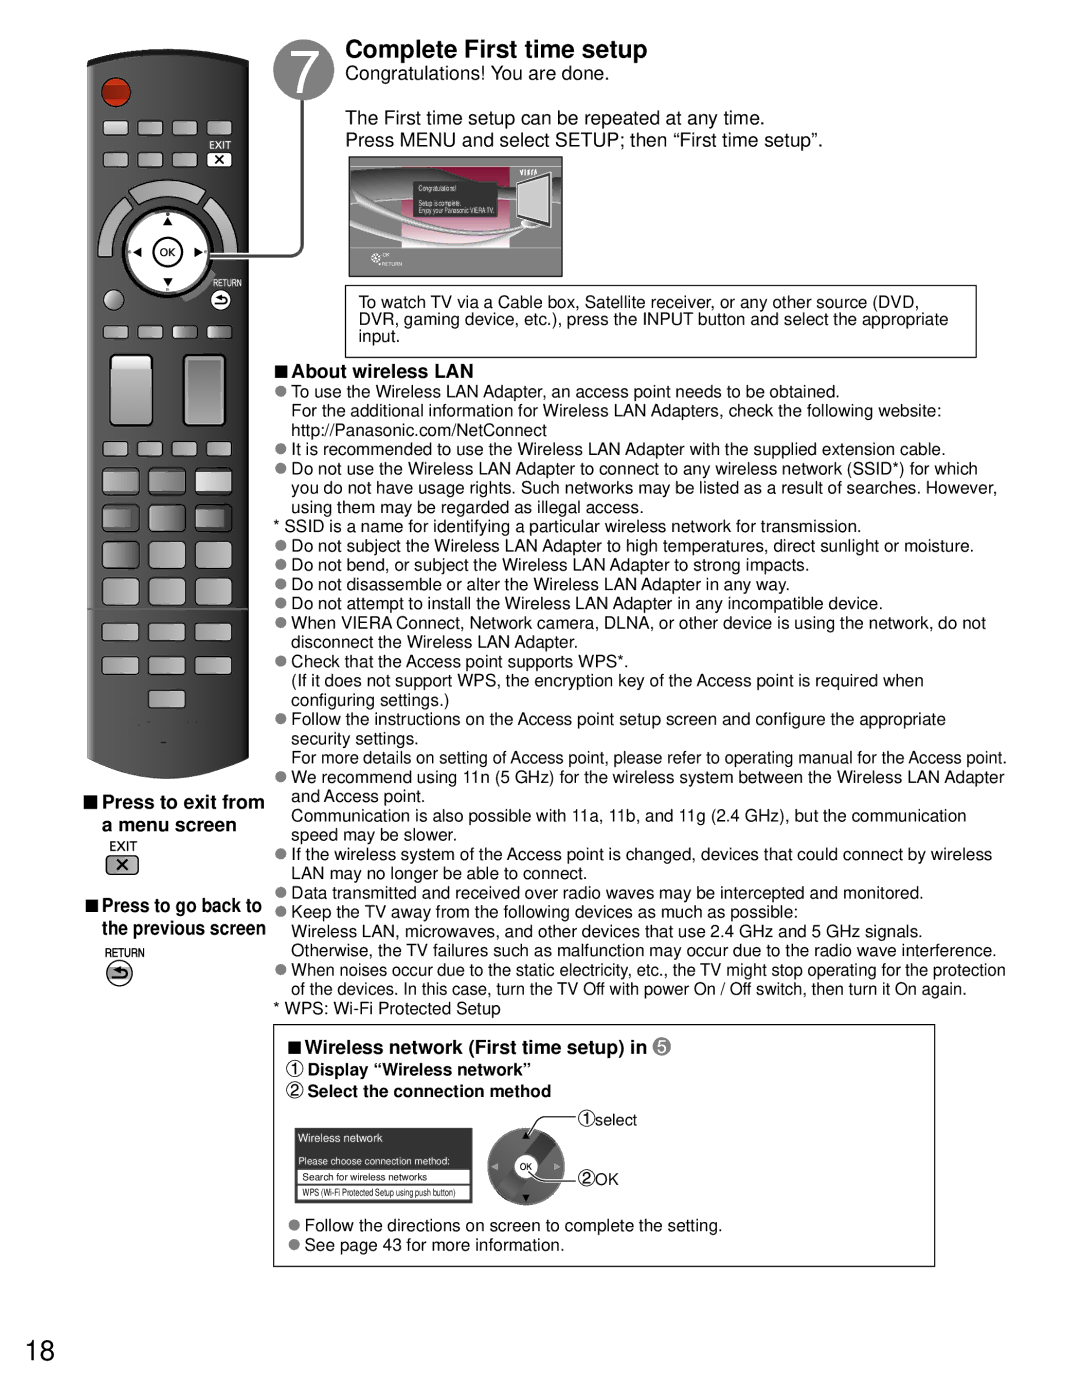 Panasonic TC-P55GT31 owner manual Complete First time setup, About wireless LAN, Wireless network First time setup 